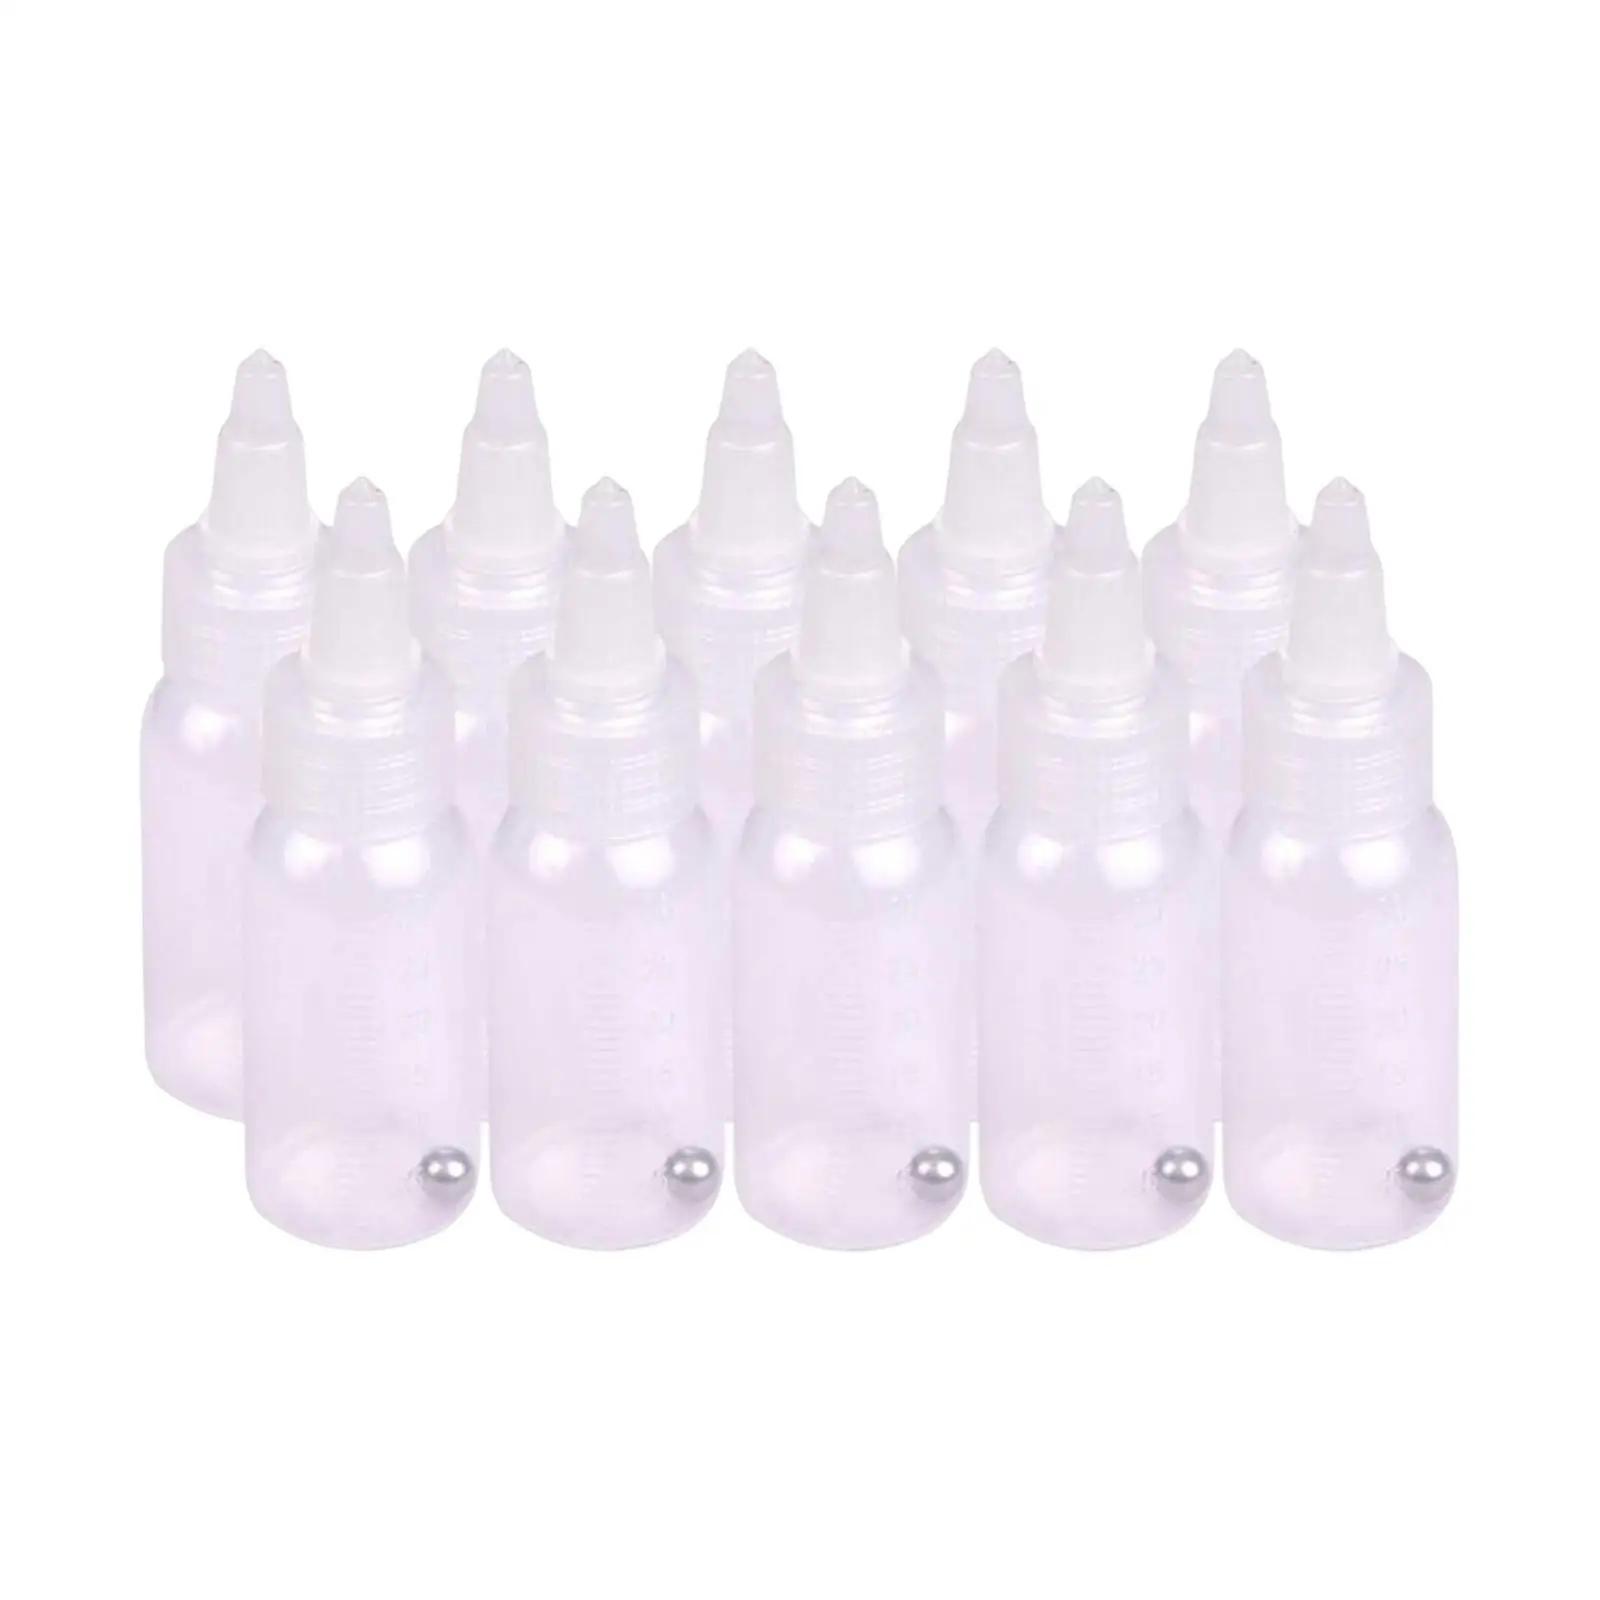 

10x Paint Dropper Bottles Portable 30ml with Mixing Bead Replacement Jars Paint